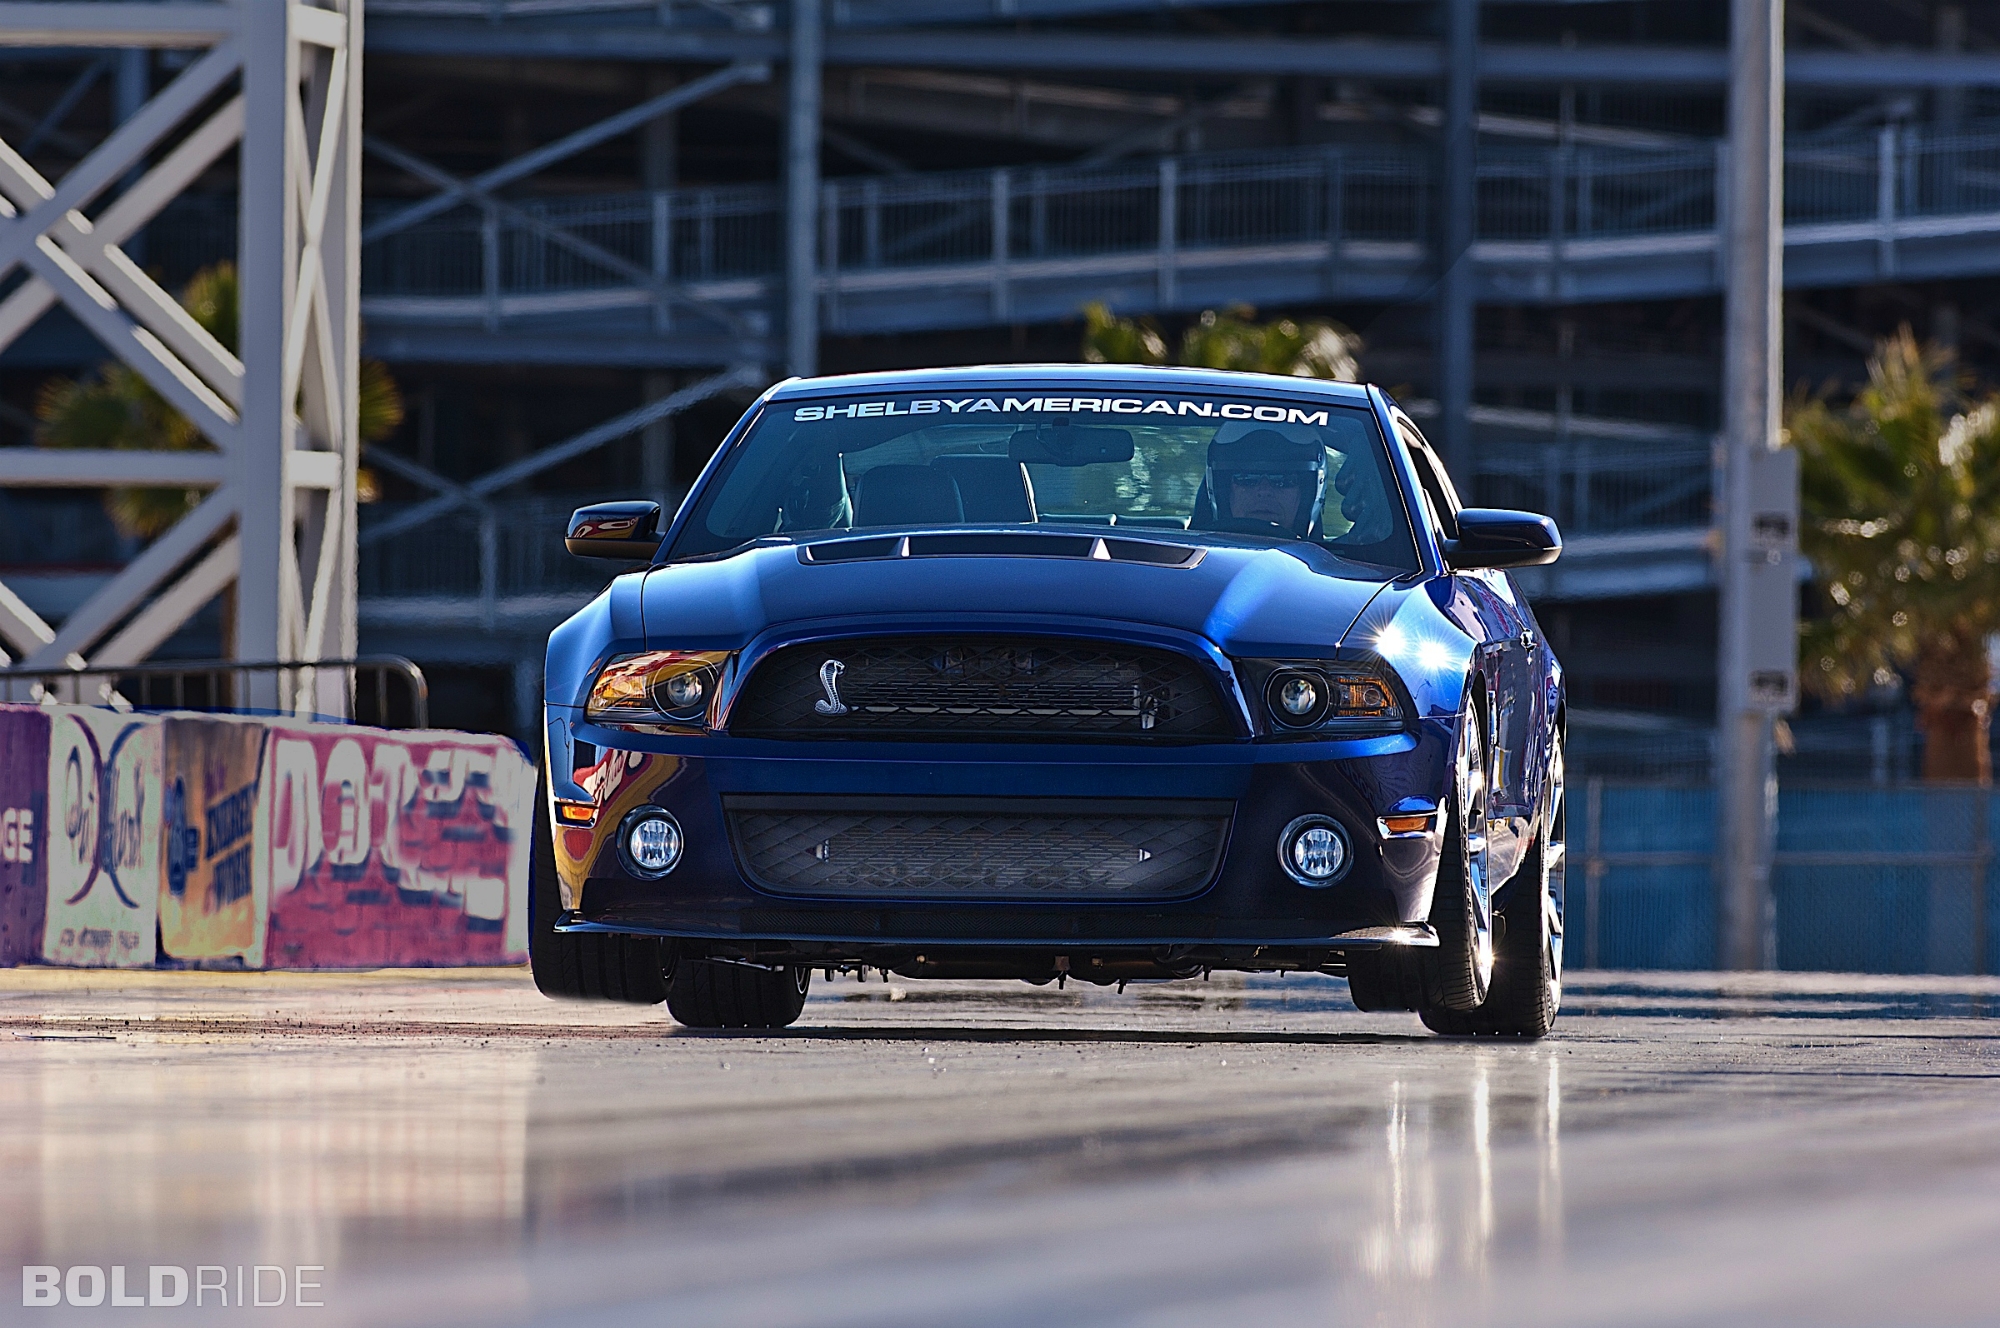 Ford, Mustang, Shelby, Drag, Racing, Race, Car, Hot, Rod